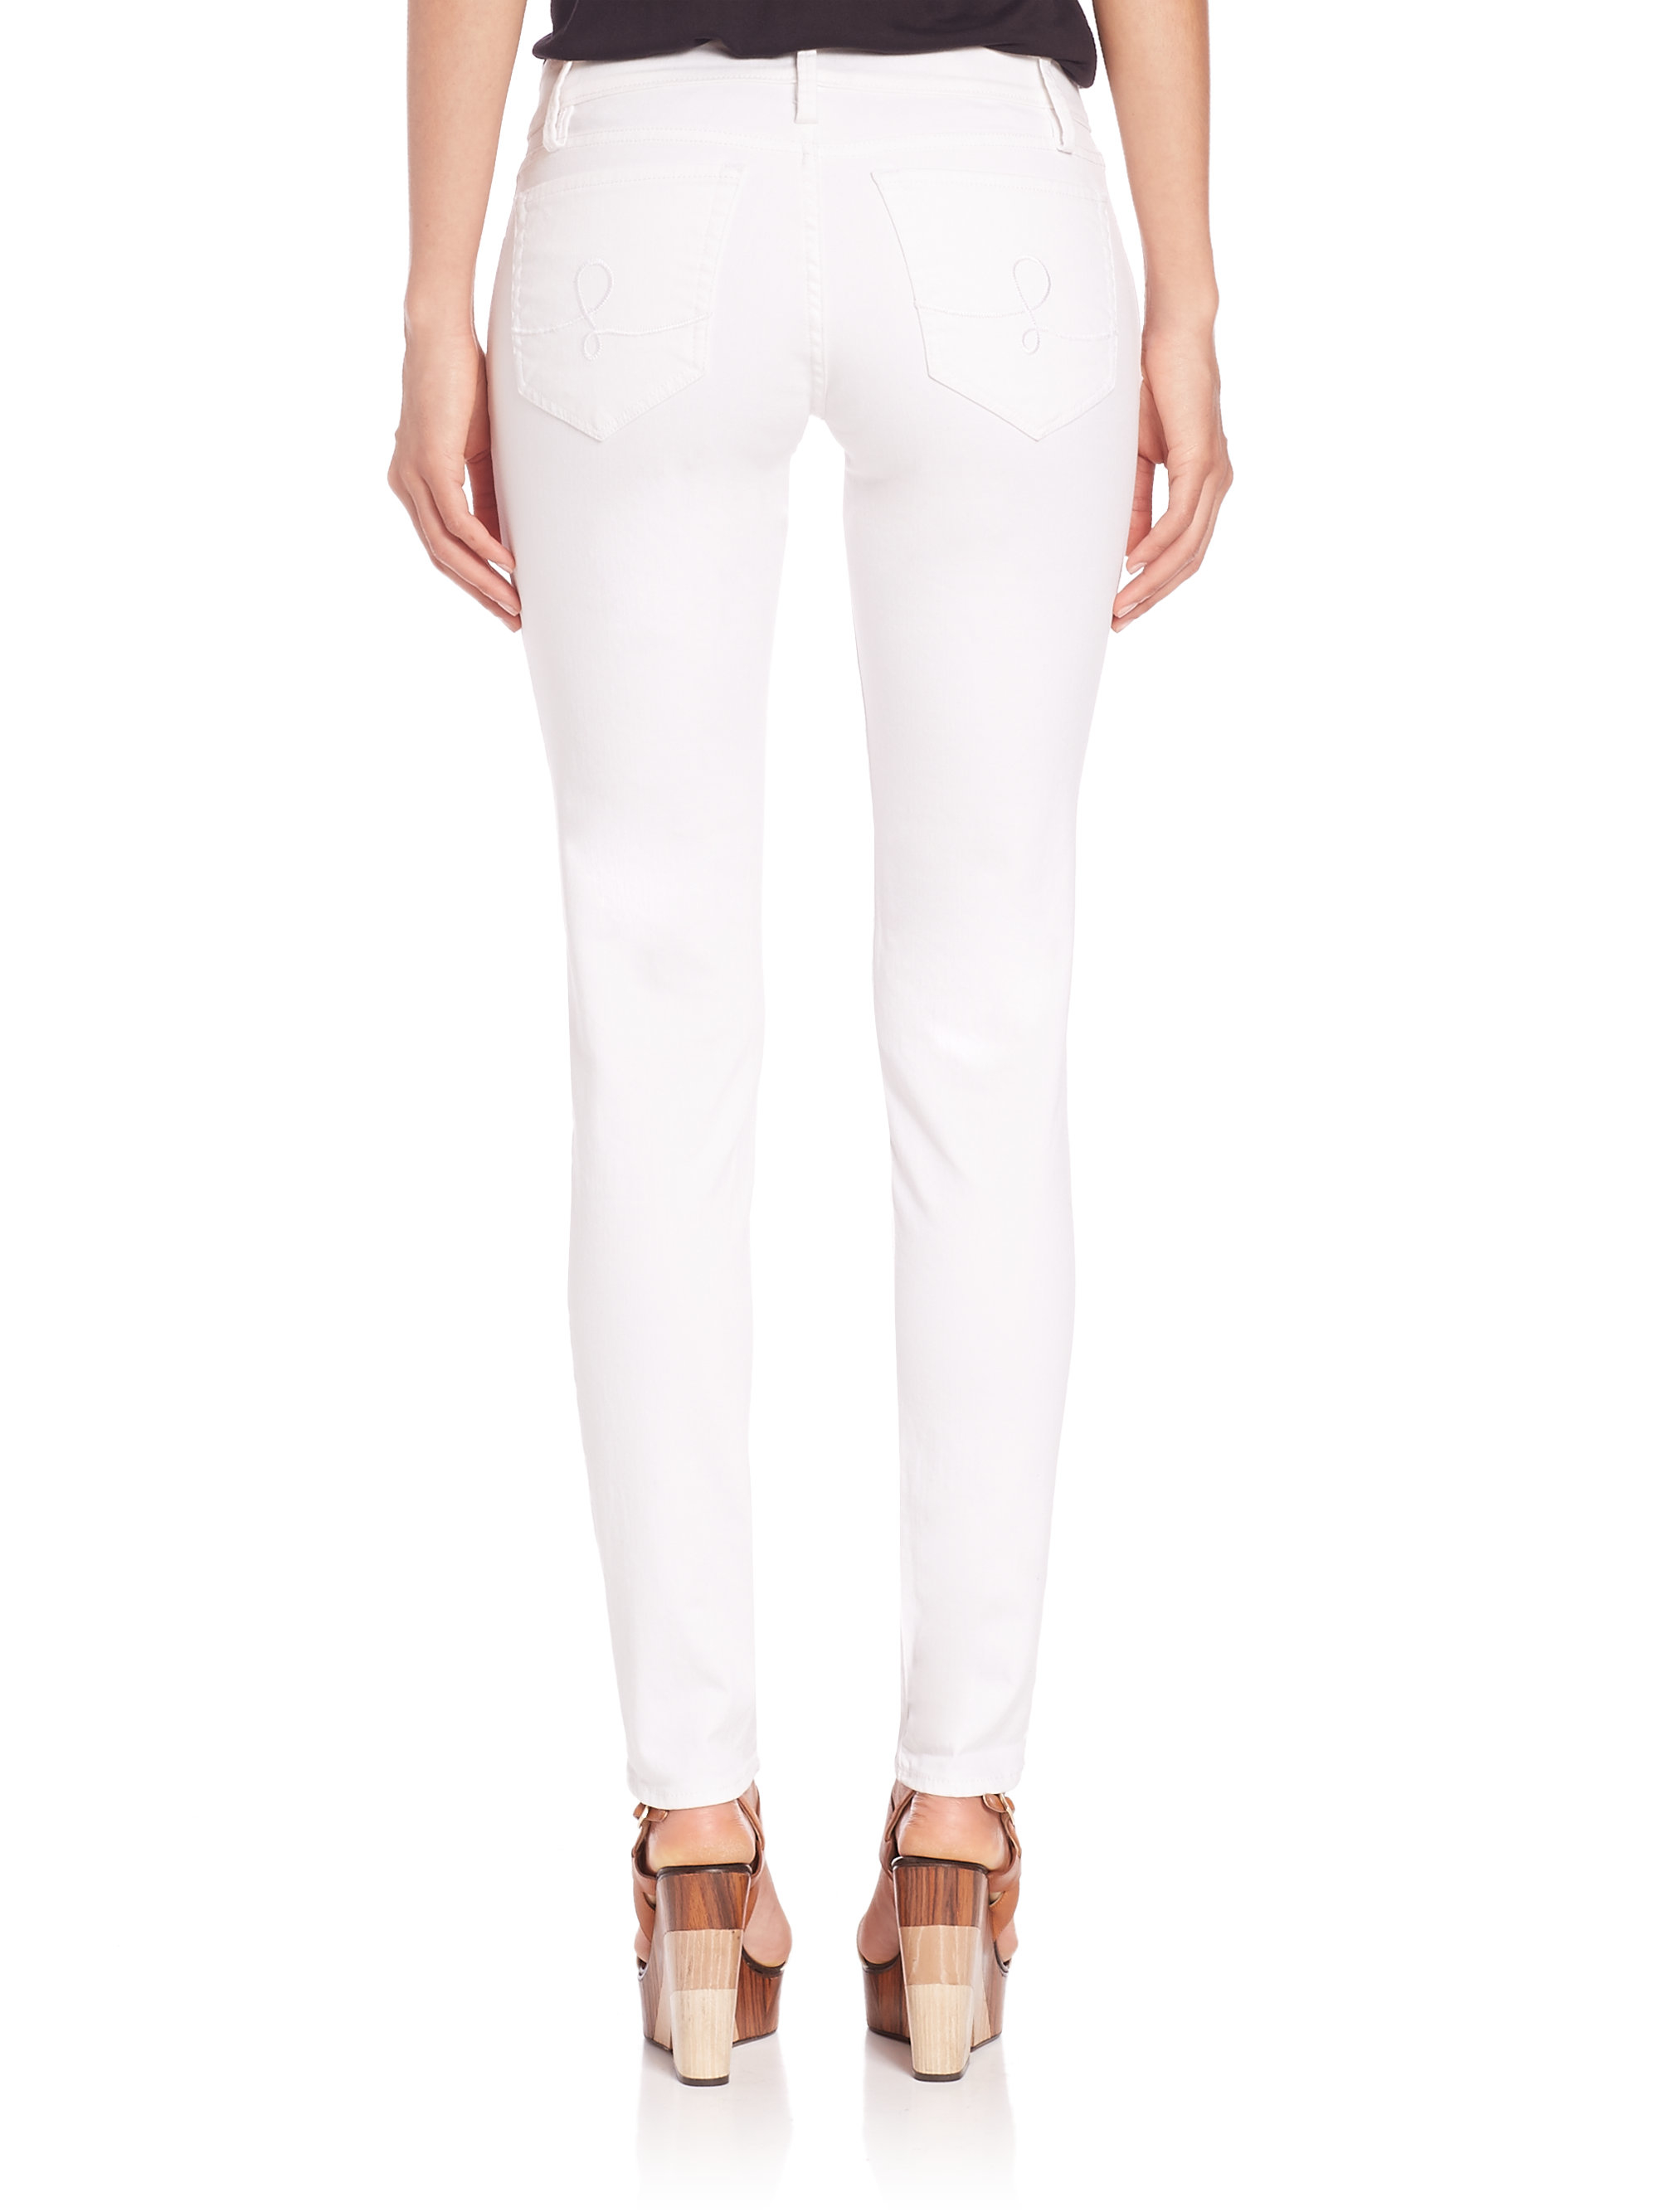 Lilly pulitzer Worth Skinny Jeans in White | Lyst